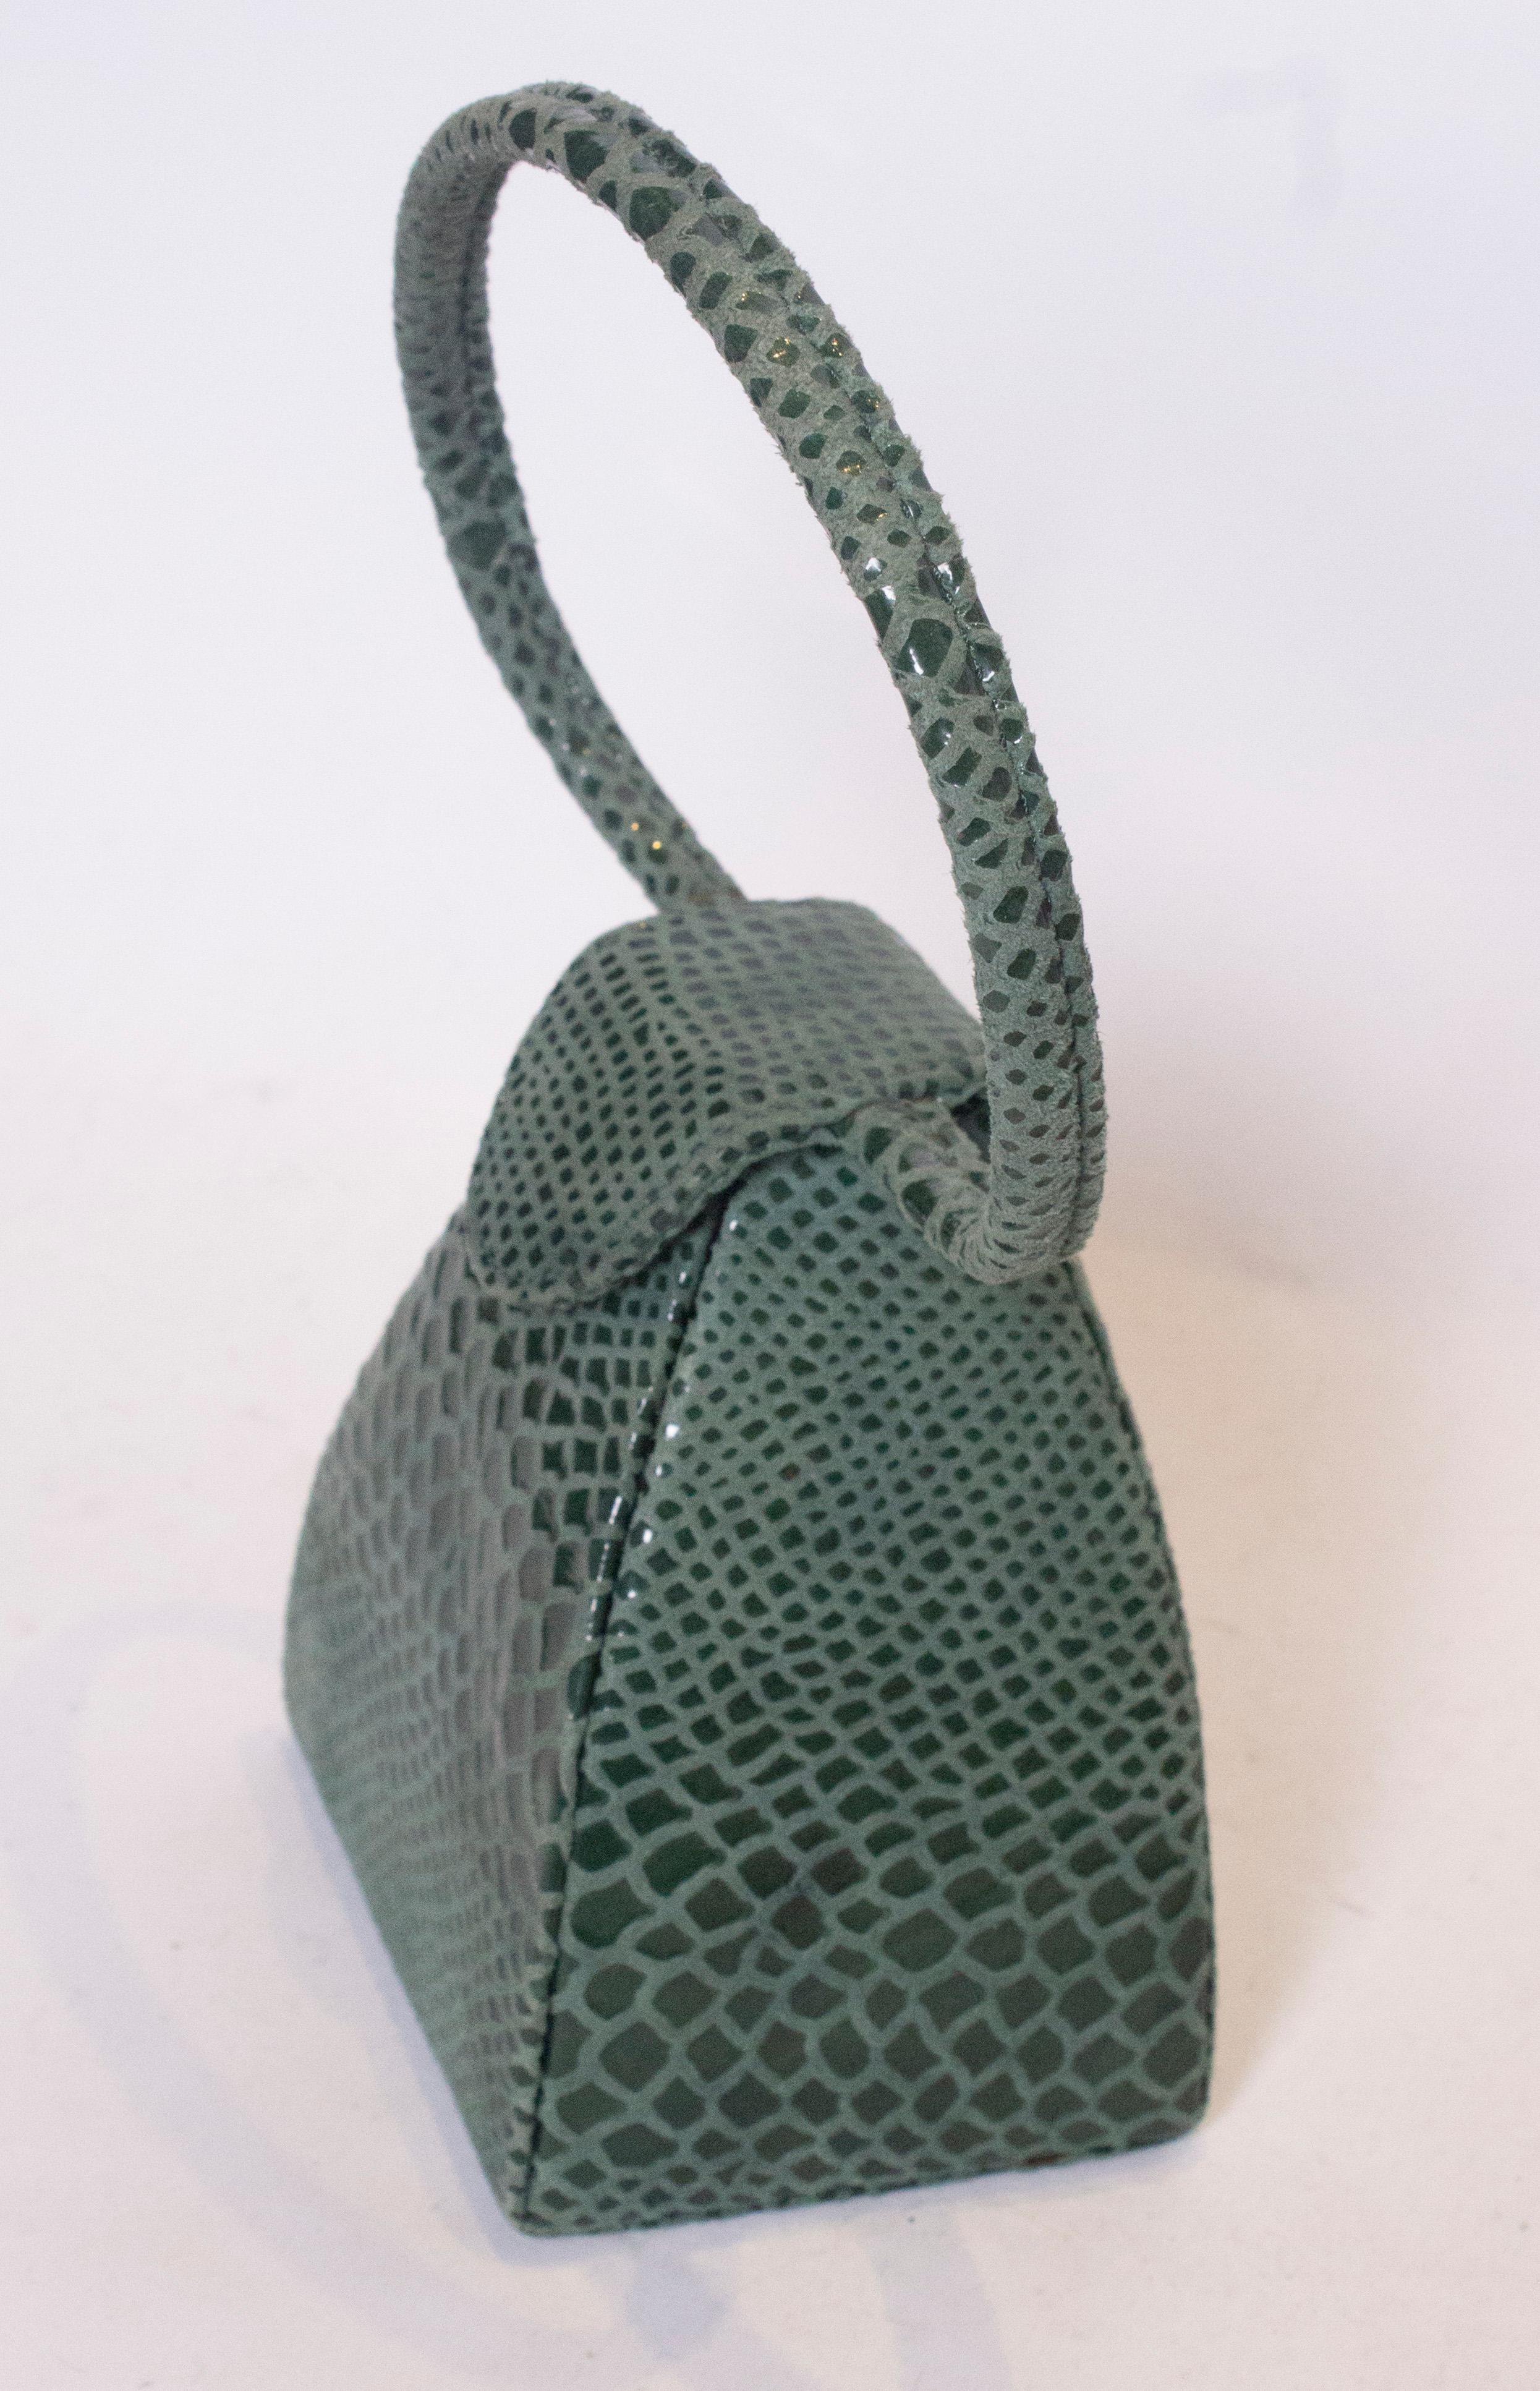 A chic vintage box bag in a lovely green colour 'snakeskin' . The bag has a chic round handle and popper fastening at the top , its a great shape.  Measurements: width 4 1/2'', height 6'', depth 4''